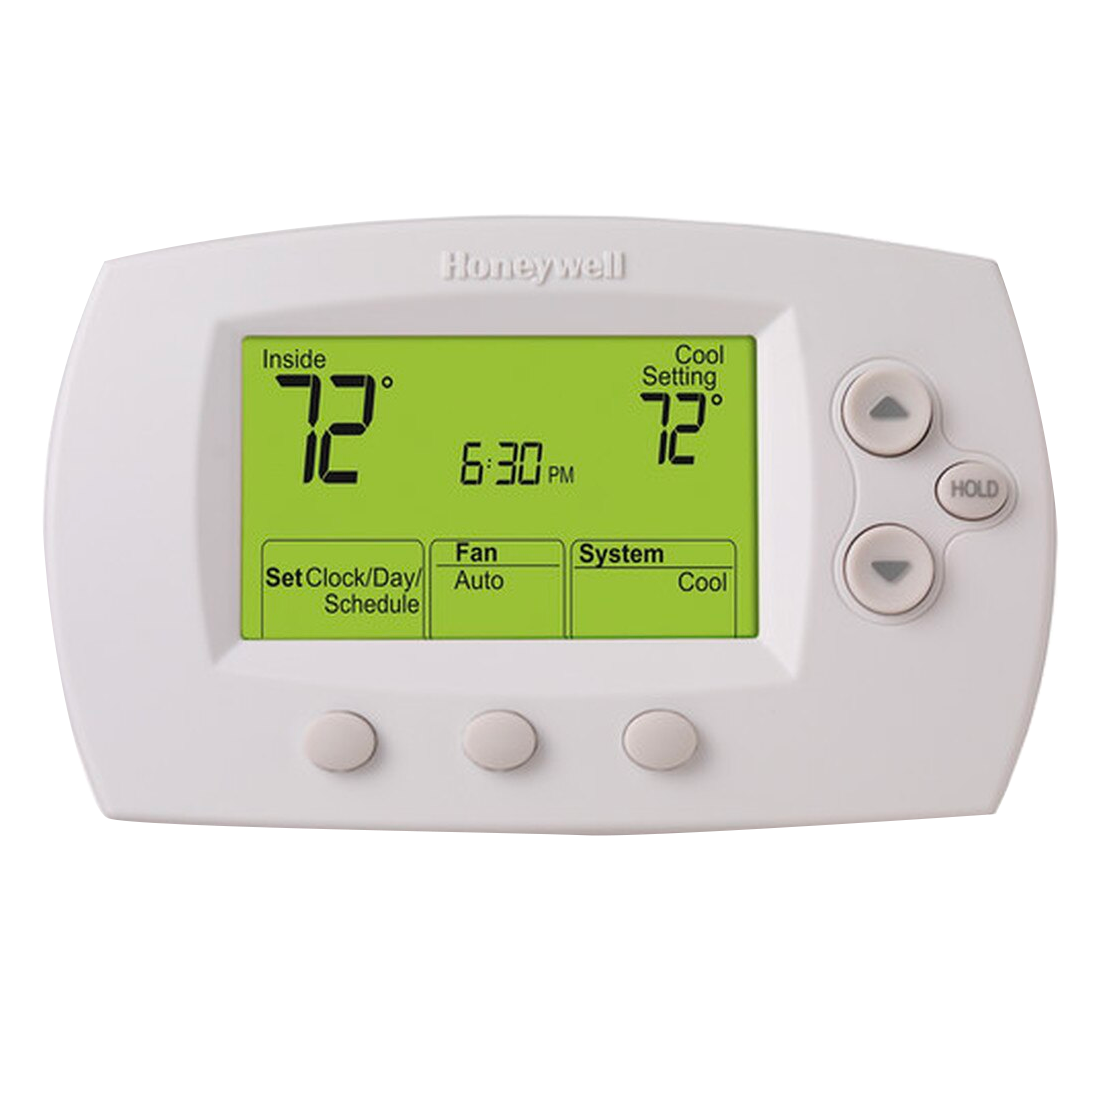 Honeywell Home Wifi 7-Day Programmable Thermostat, White